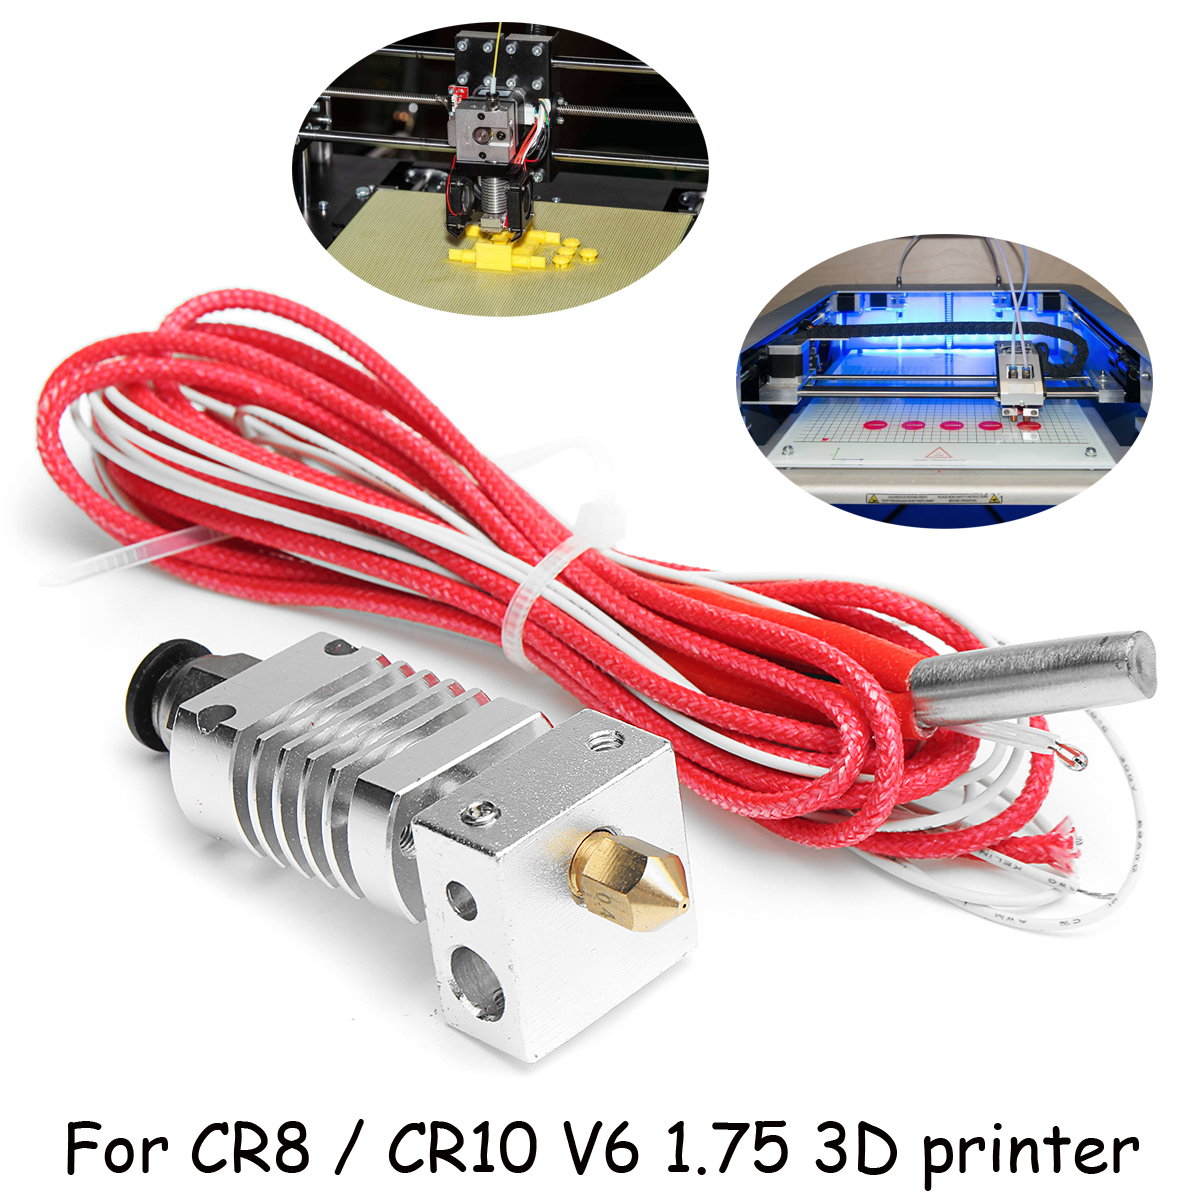 V6 1.75mm All Metal J-Head Hotend Remote Extruder Kit with Heating tube for CR10 3D Printer 9